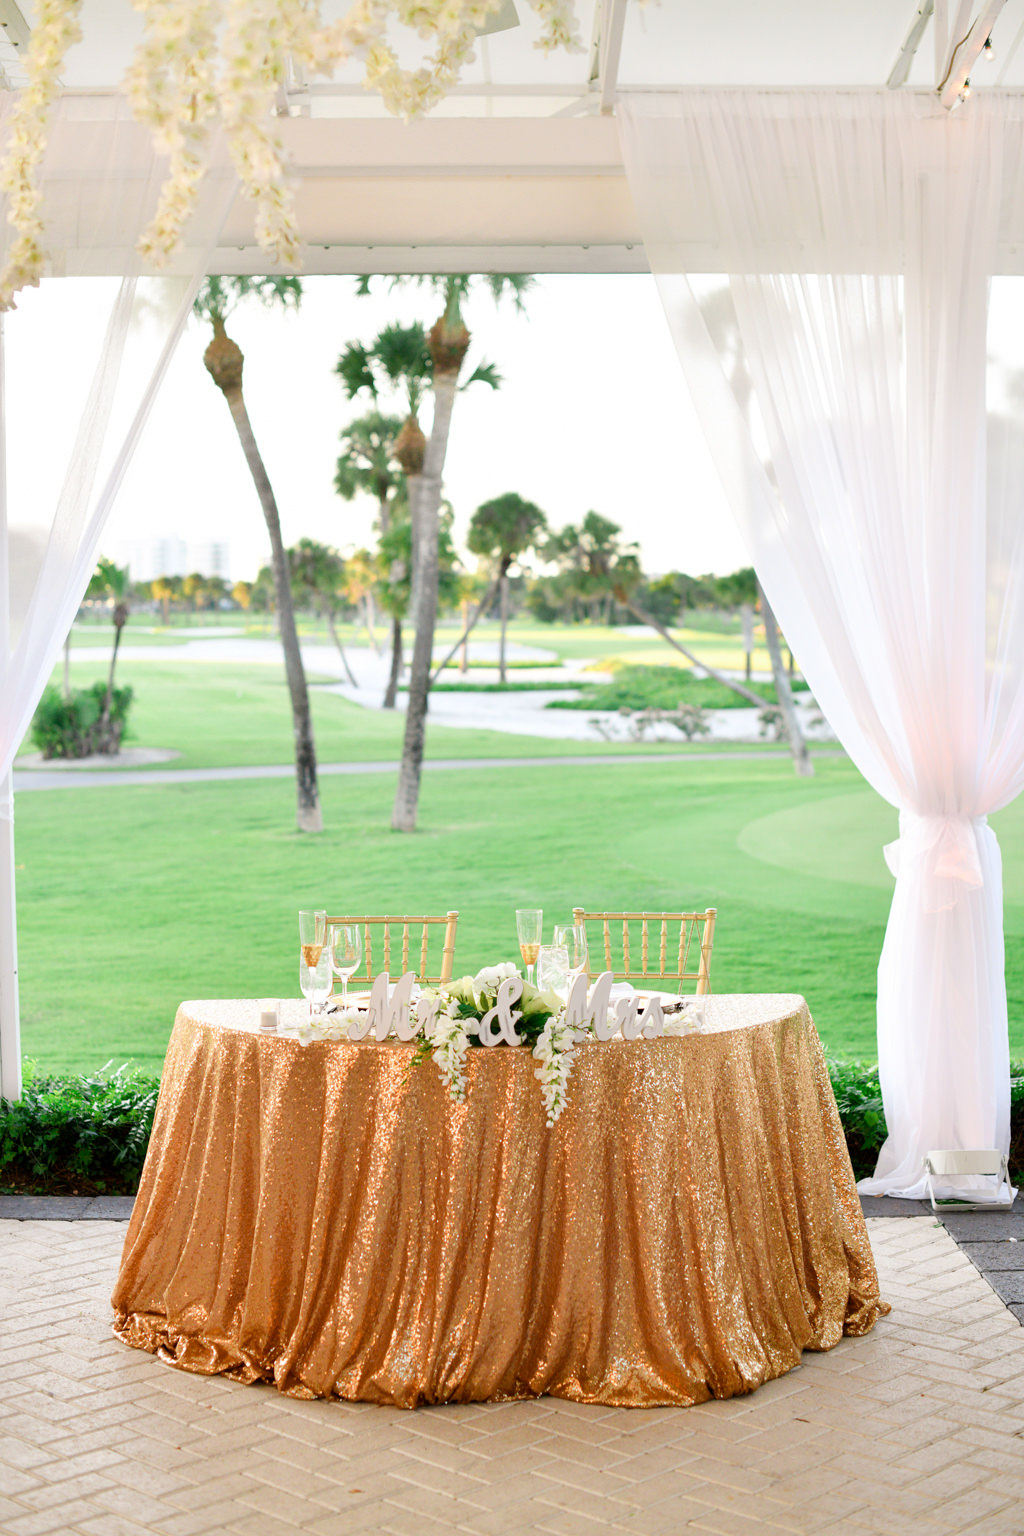 Tropical Classic Elegant Wedding Reception Decor, Sweetheart Table with Sparkle Gold Linen, White and Greenery Floral Arrangement and Gold Chiavari Chairs with White Sheer Draping and Golf Course Backdrop | Sarasota Wedding Venue The Resort at Longboat Key Club